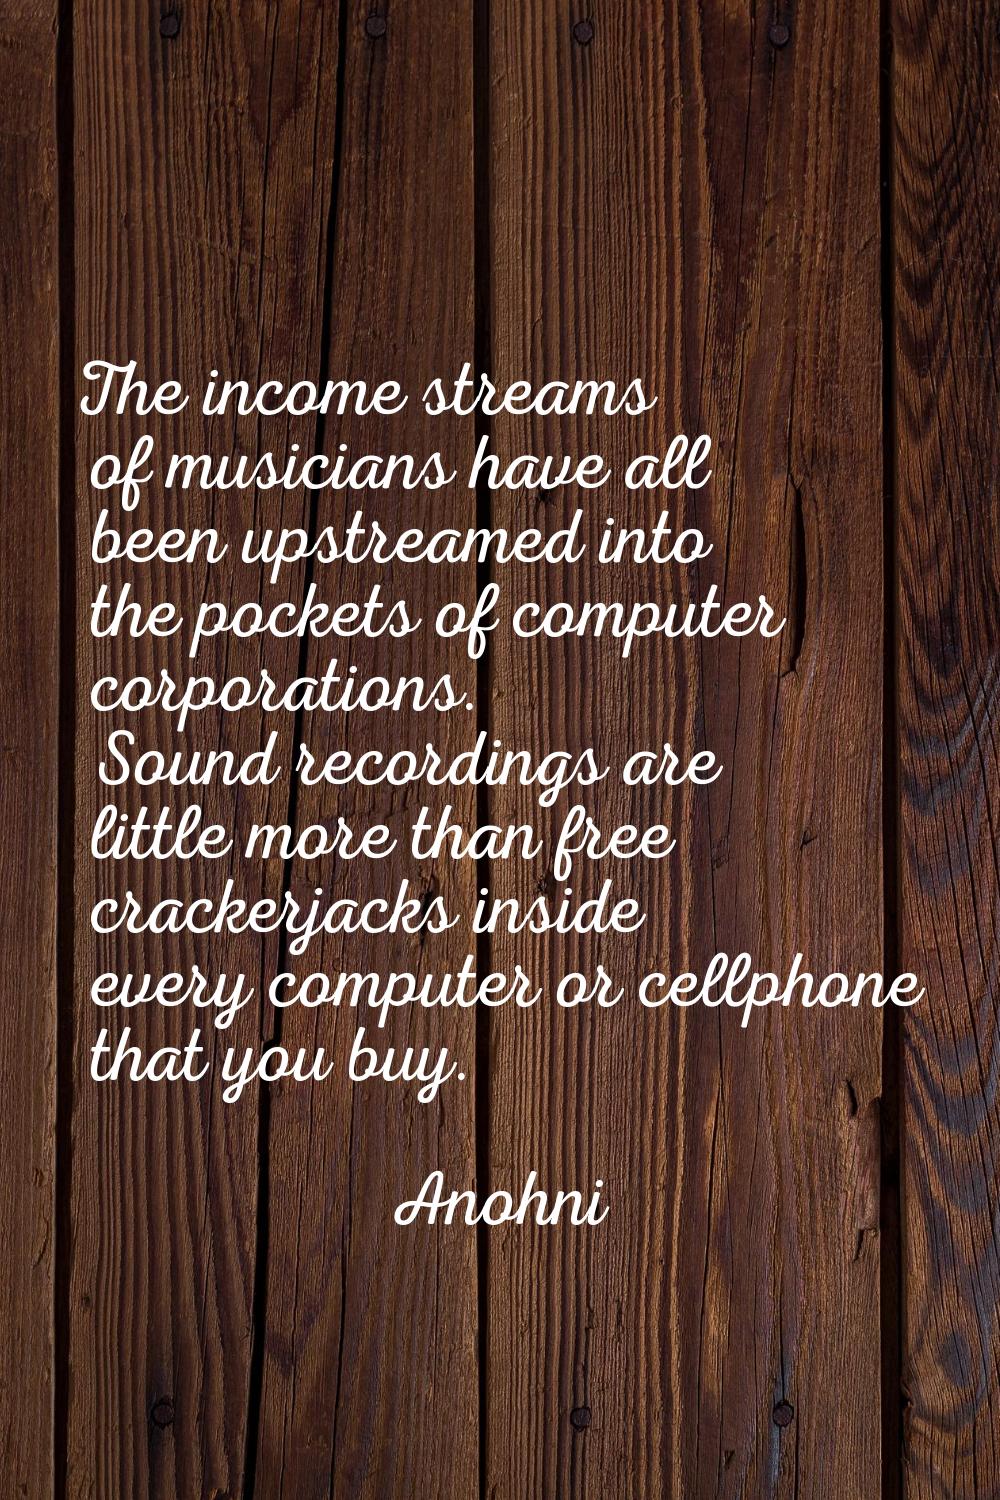 The income streams of musicians have all been upstreamed into the pockets of computer corporations.